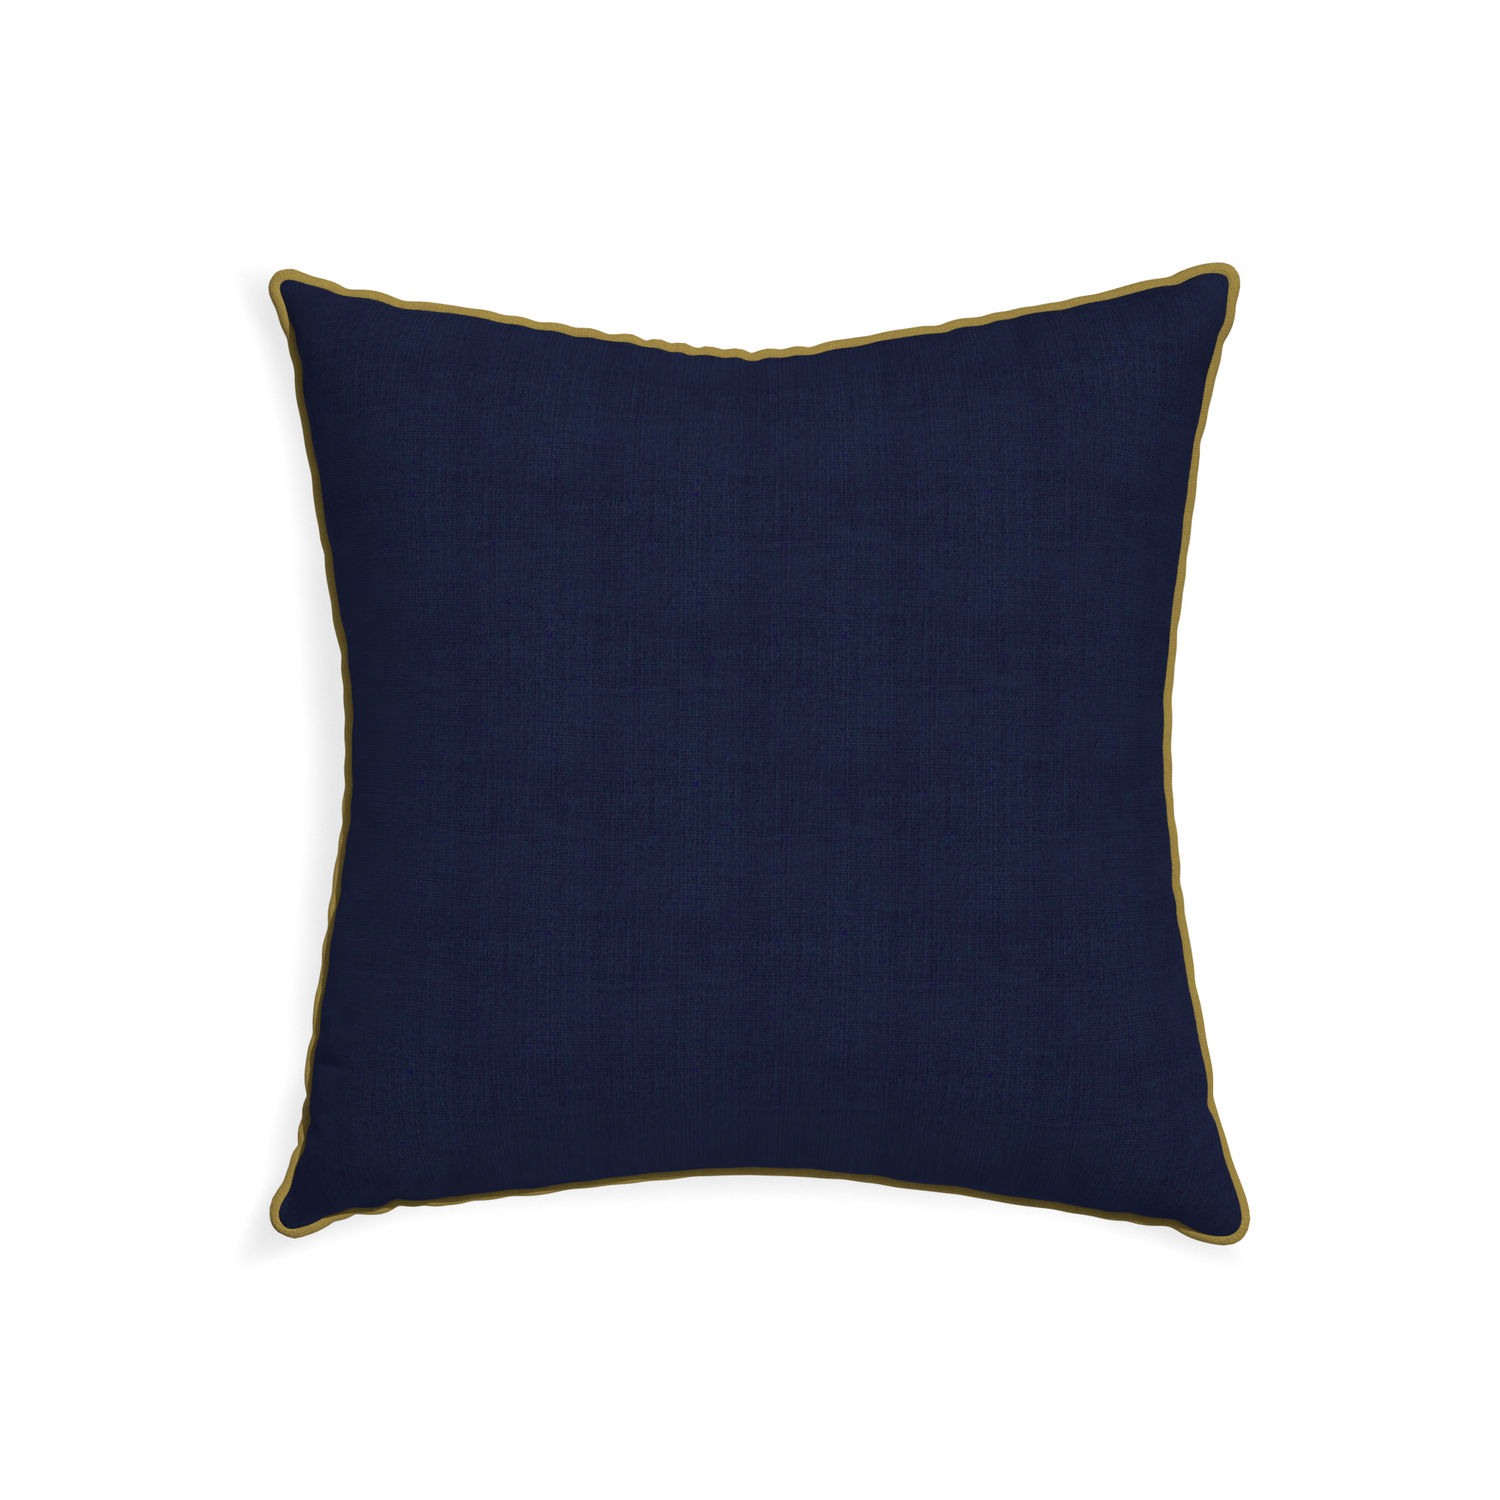 22-square midnight custom navy bluepillow with c piping on white background